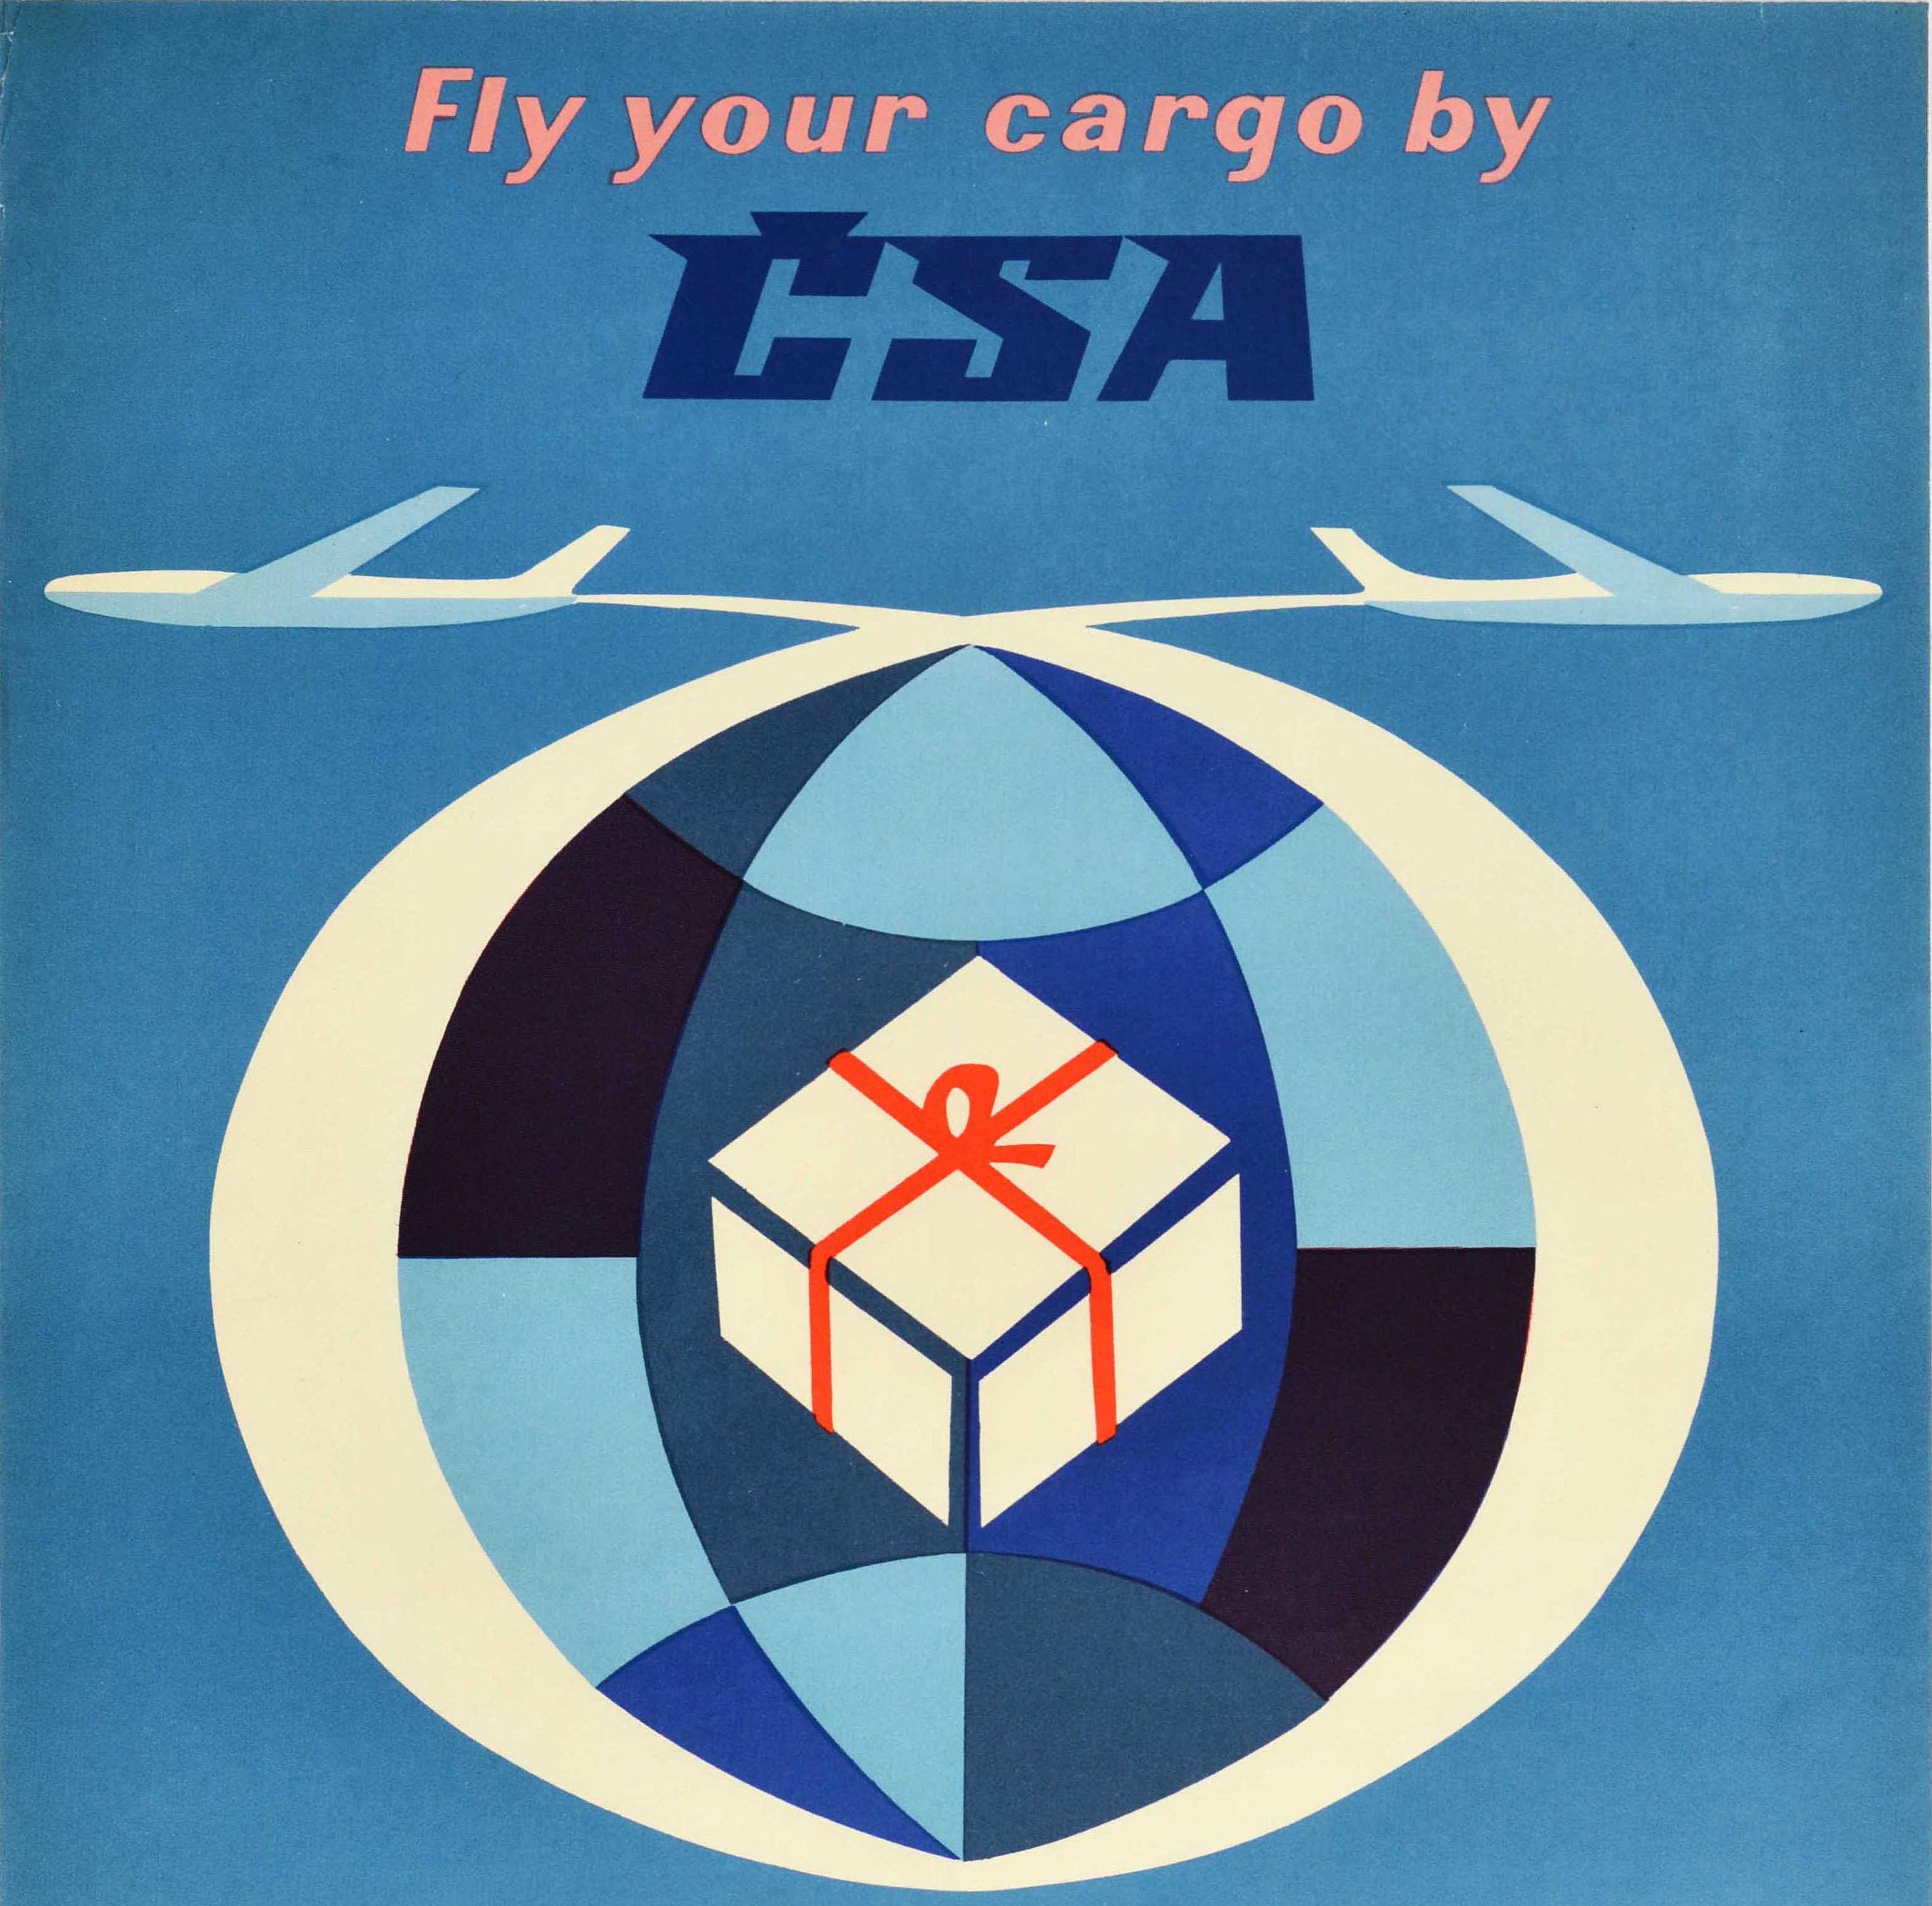 Original Vintage Advertising Poster Fly Your Cargo By CSA Czechoslovak Airlines In Good Condition For Sale In London, GB